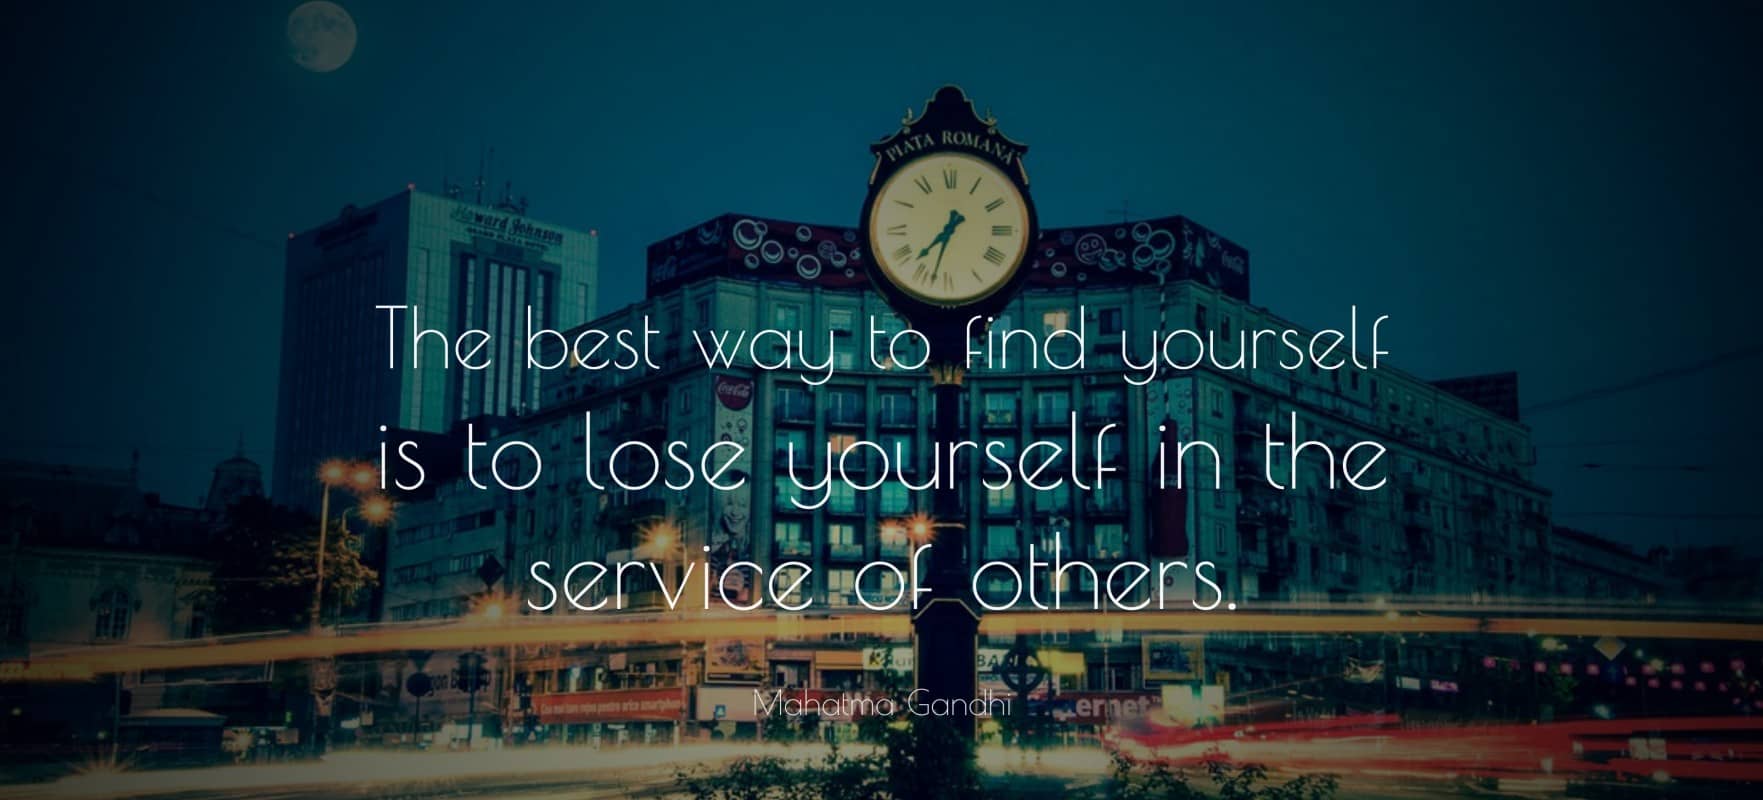 Find yourself through service quote